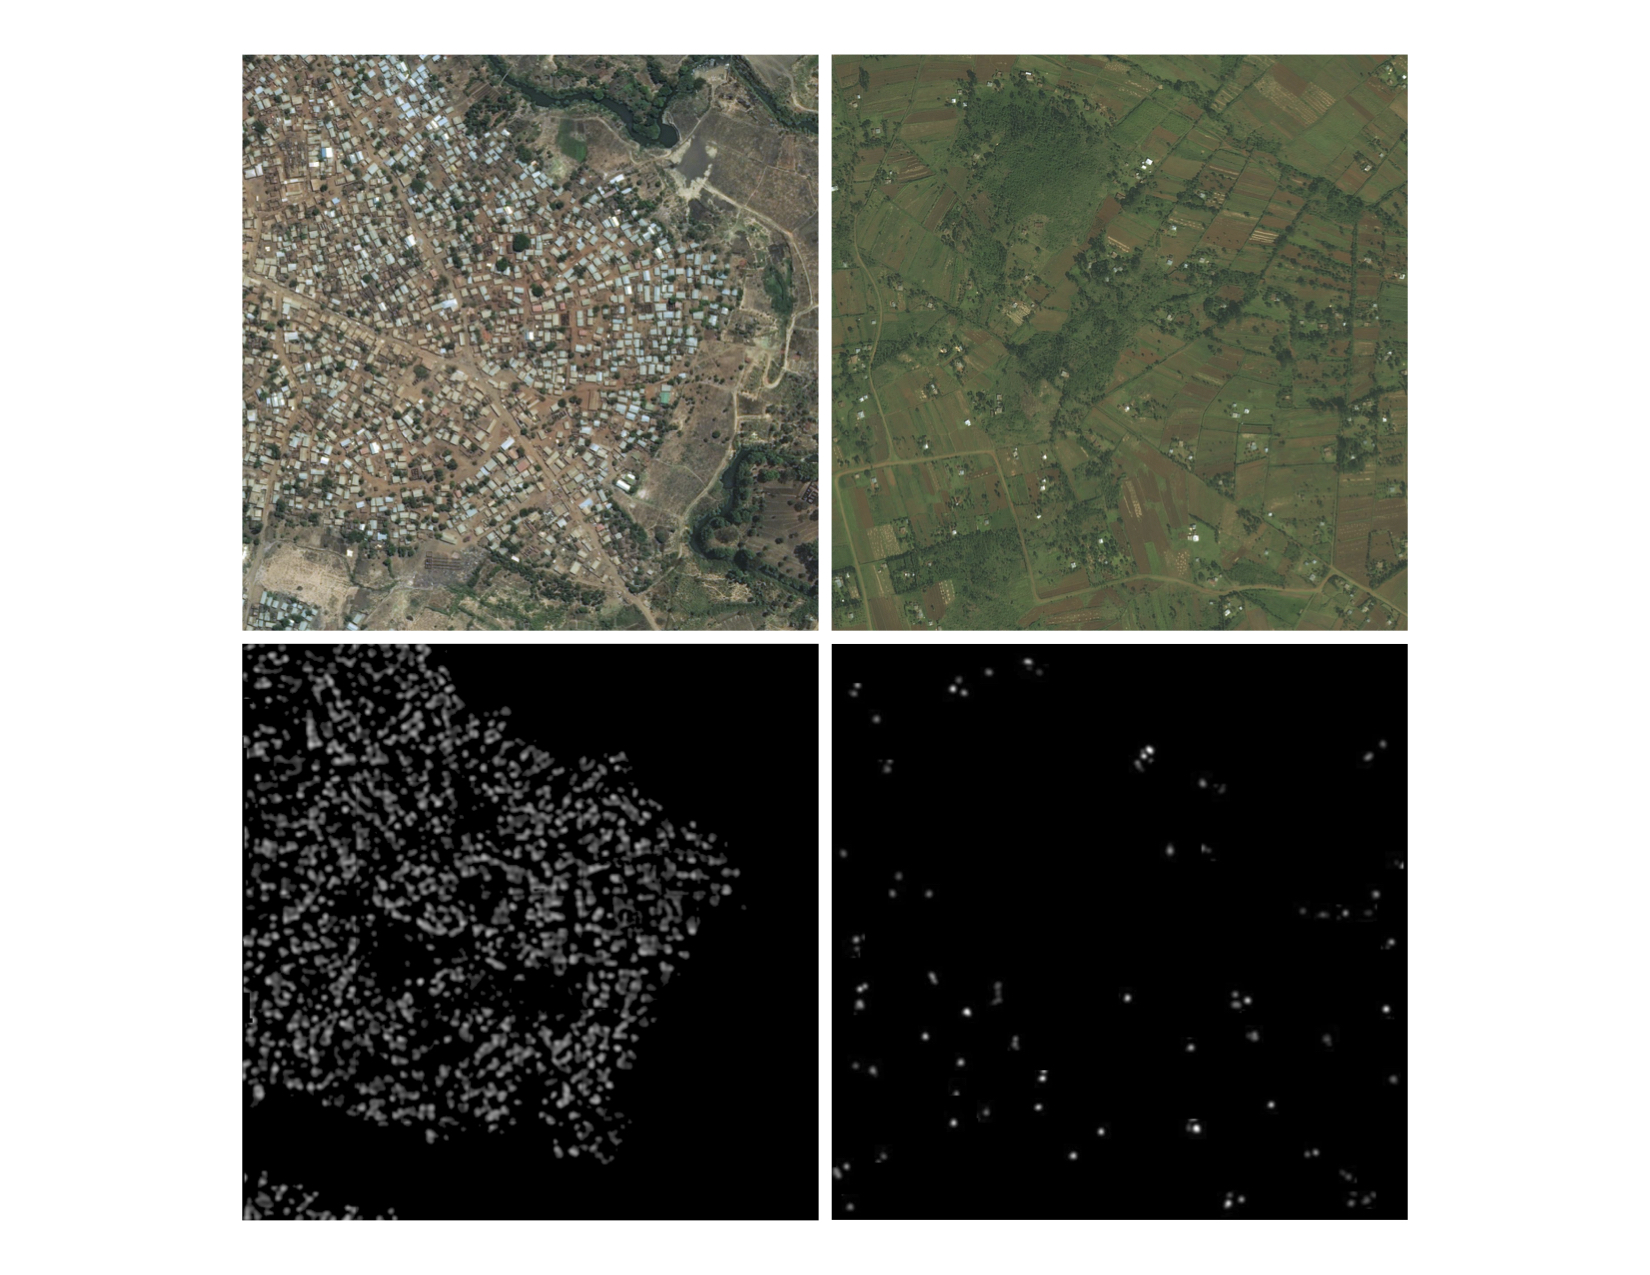 Display of both urban and rural populations on the top from DigitalGlobe imagery with Facebook's analysis underneath.